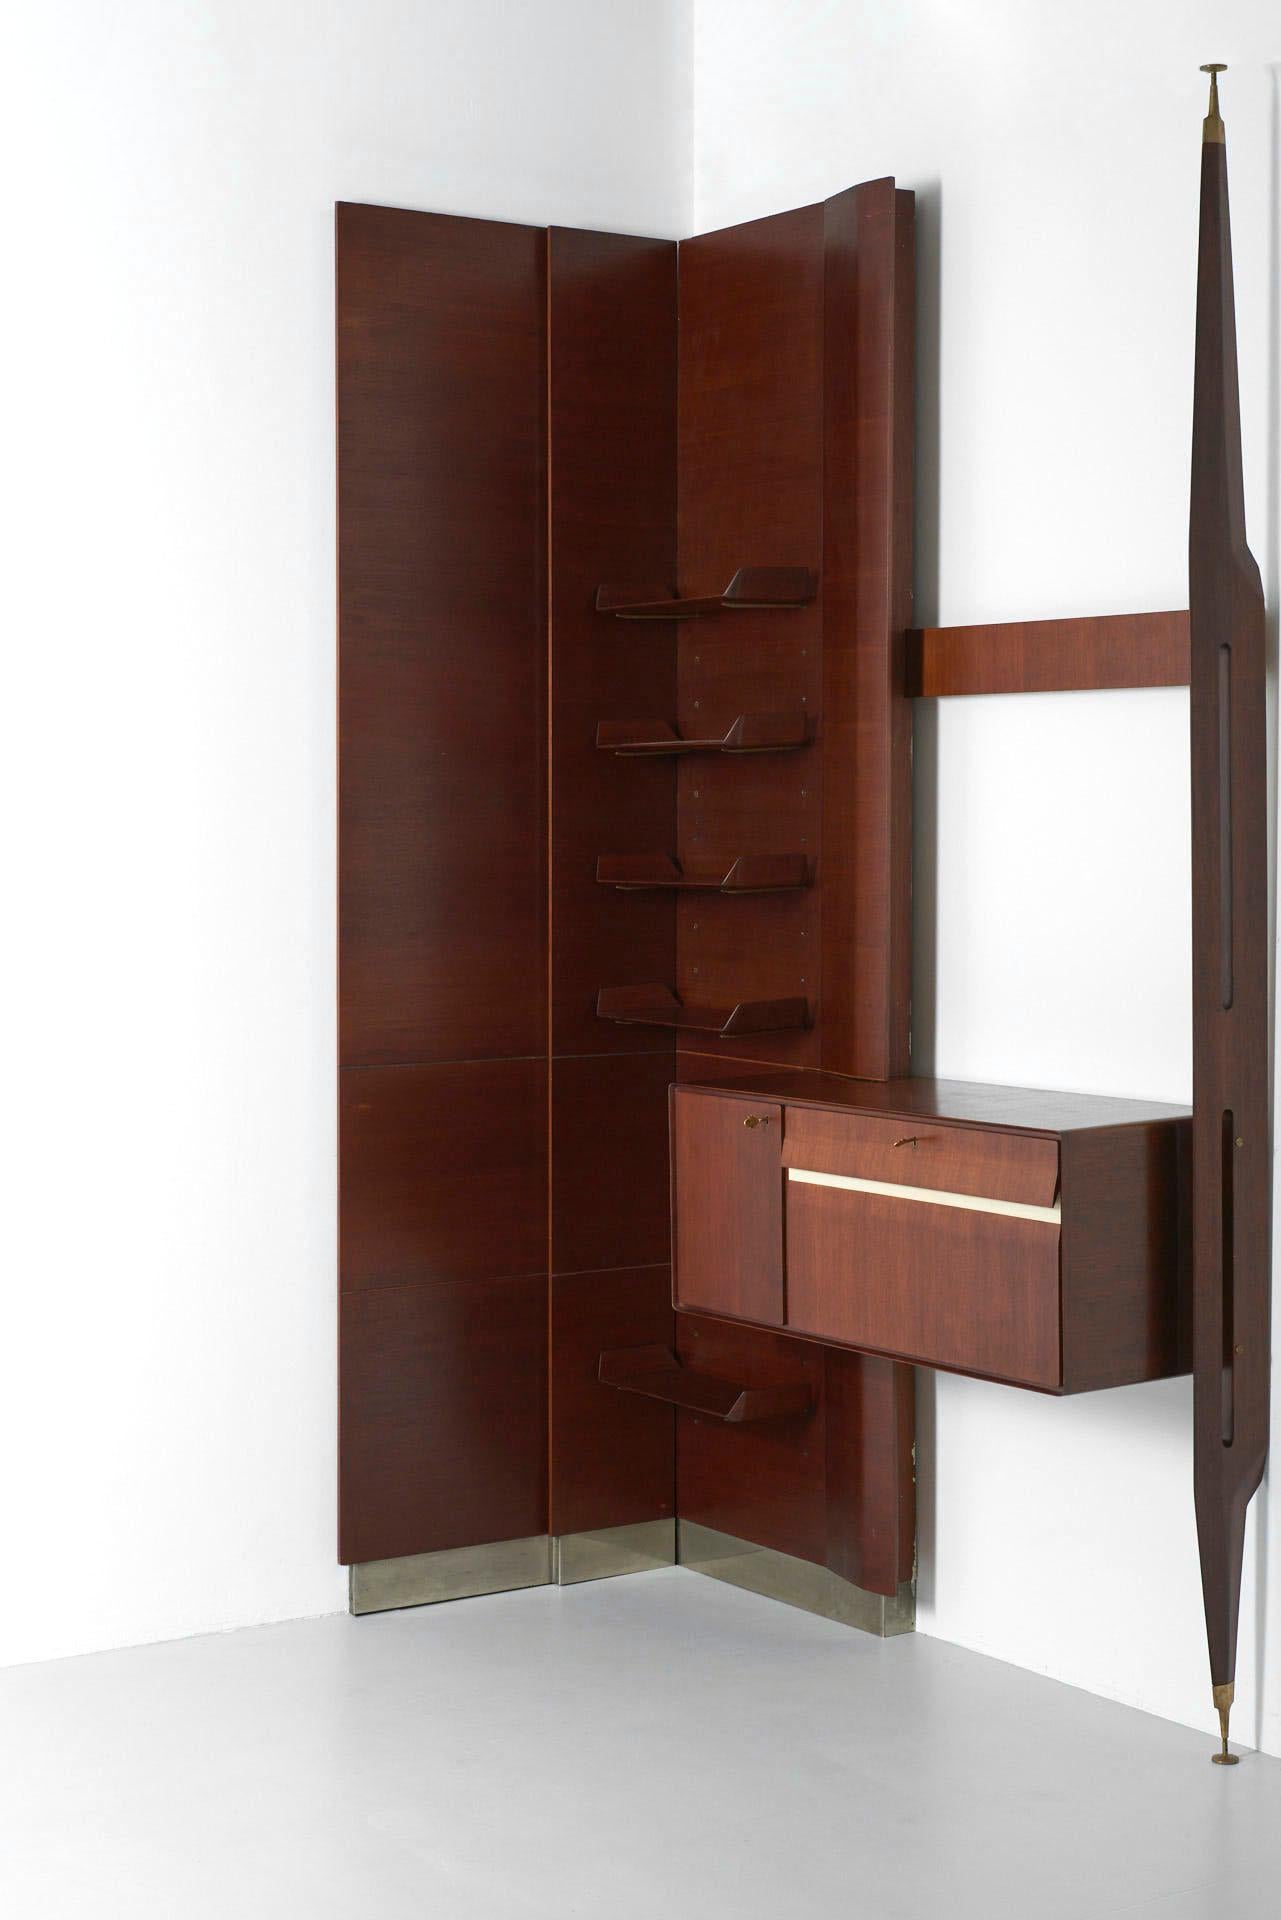 Italian wall unit in rosewood with shelves and a cabinet. The supports of the shelves are in solid brass. The height of the panels is 303cm, the endcaps of the pole can be adjusted in height. The system should be fixed to the wall, therefore it can